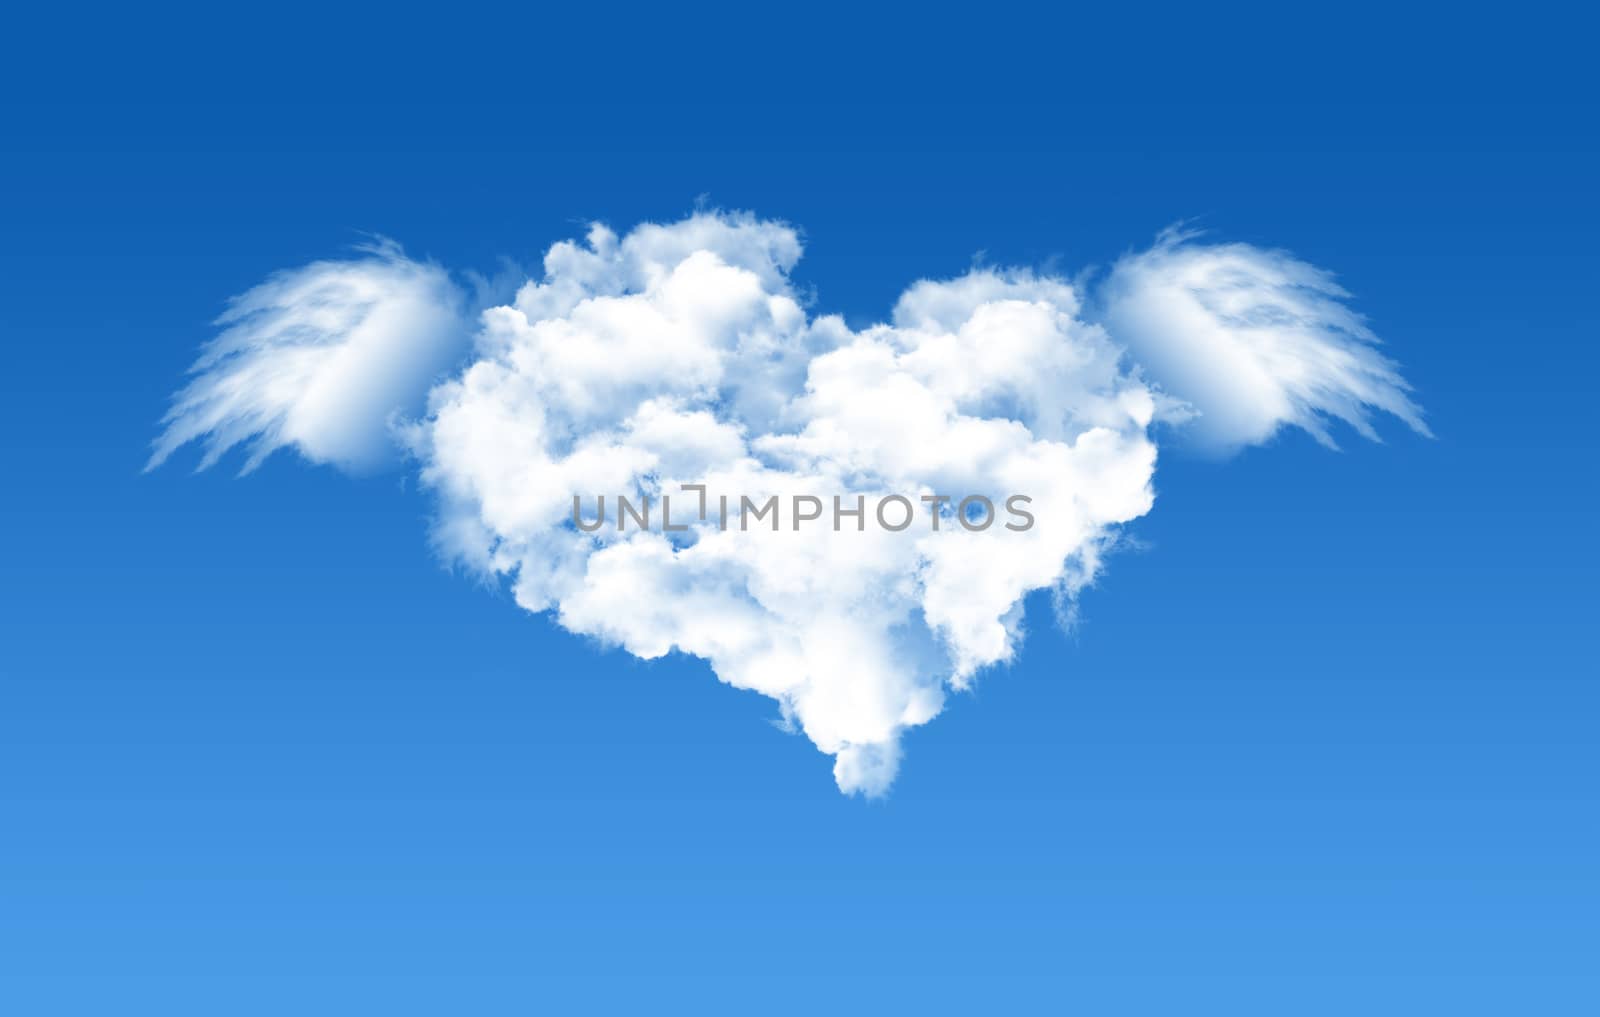 A heart shaped cloud formation against clear blue sky and flying with wings.